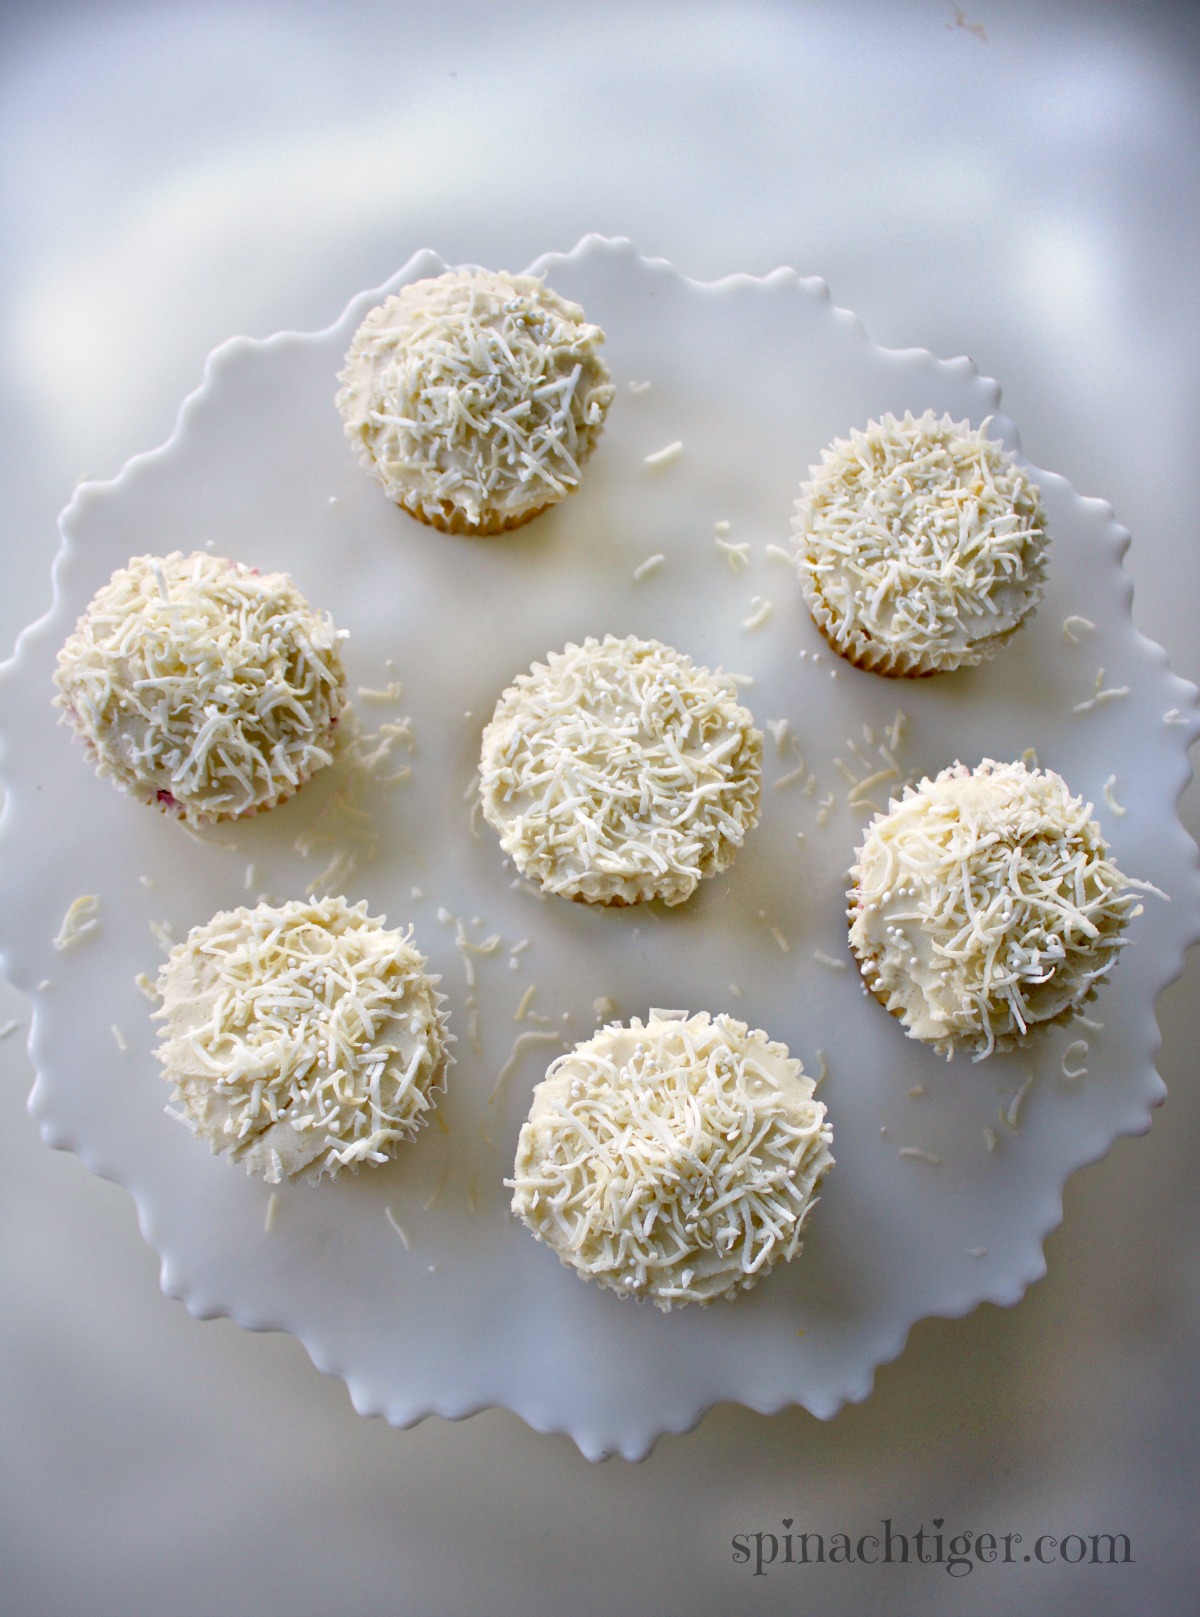 Make the Best Grain Free Coconut Cupcakes using Swerve, Coconut Flour from Spinach Tiger